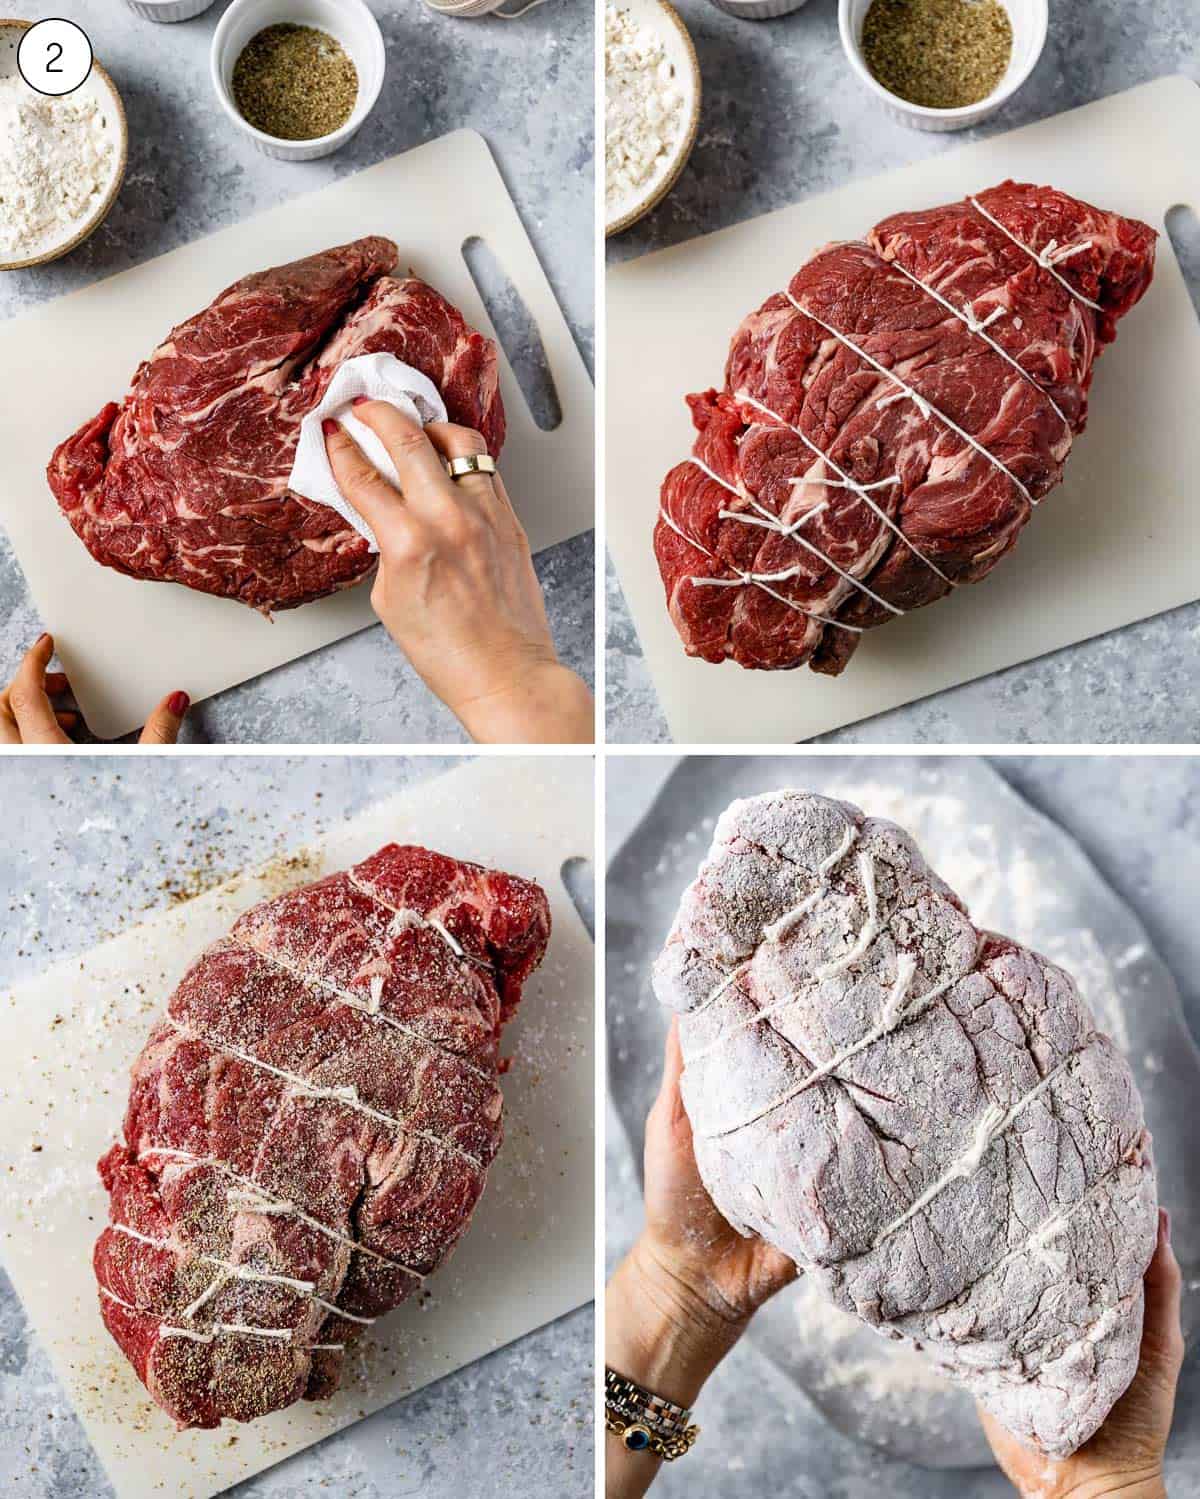 A person showing how to season and tie a beef chuck roast.